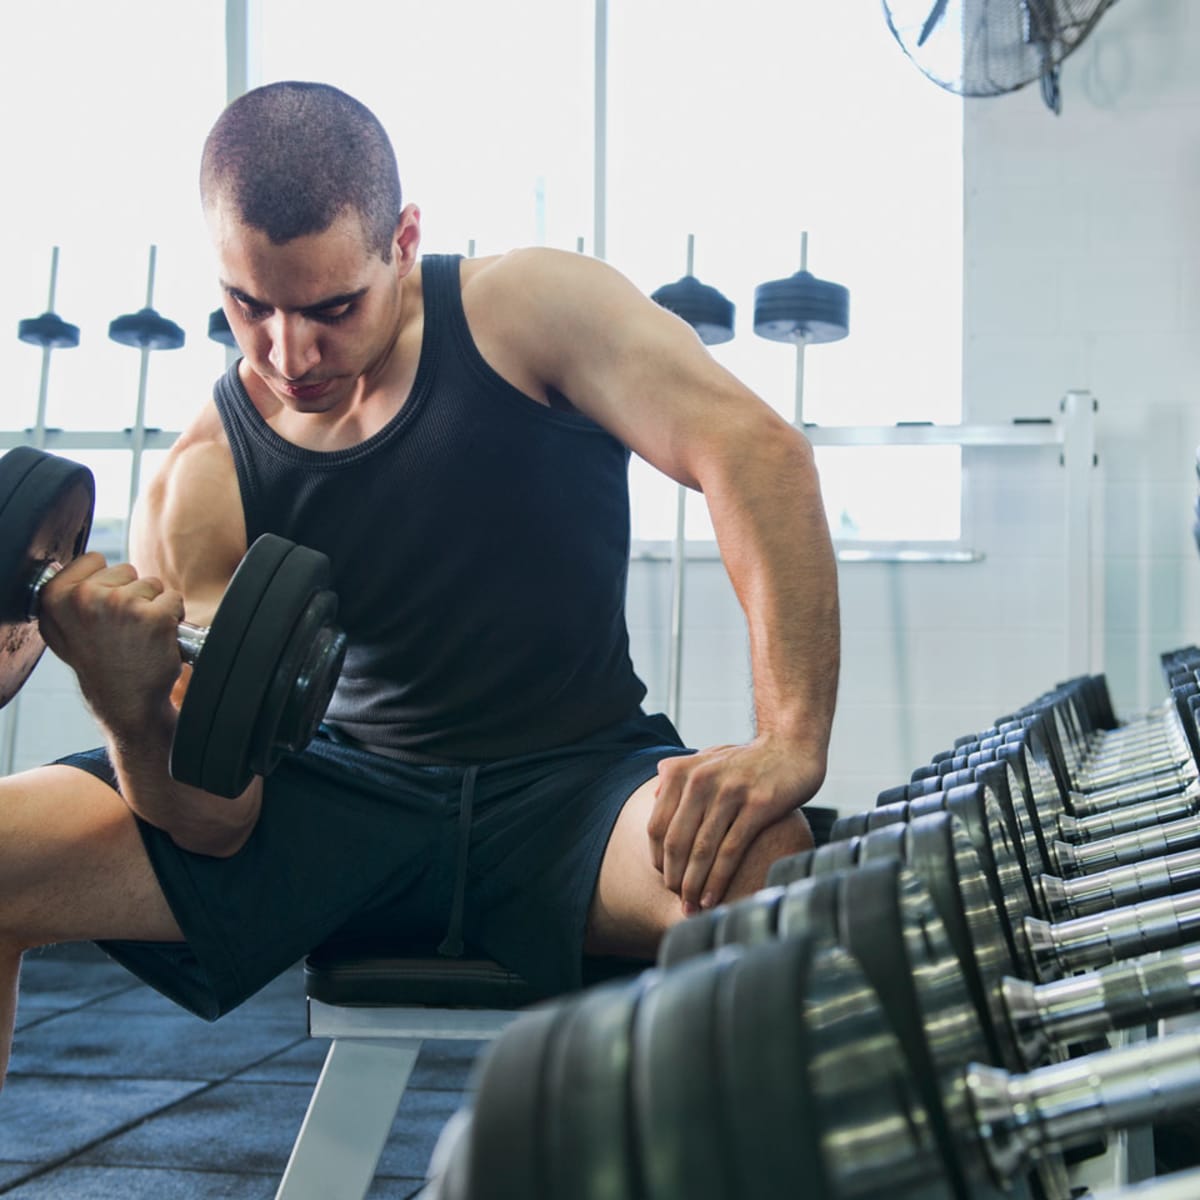 Concentrated man doing dumbbell workout. Well trained body with bulky  muscles. Sport equipment and weightlifting. Stock Photo